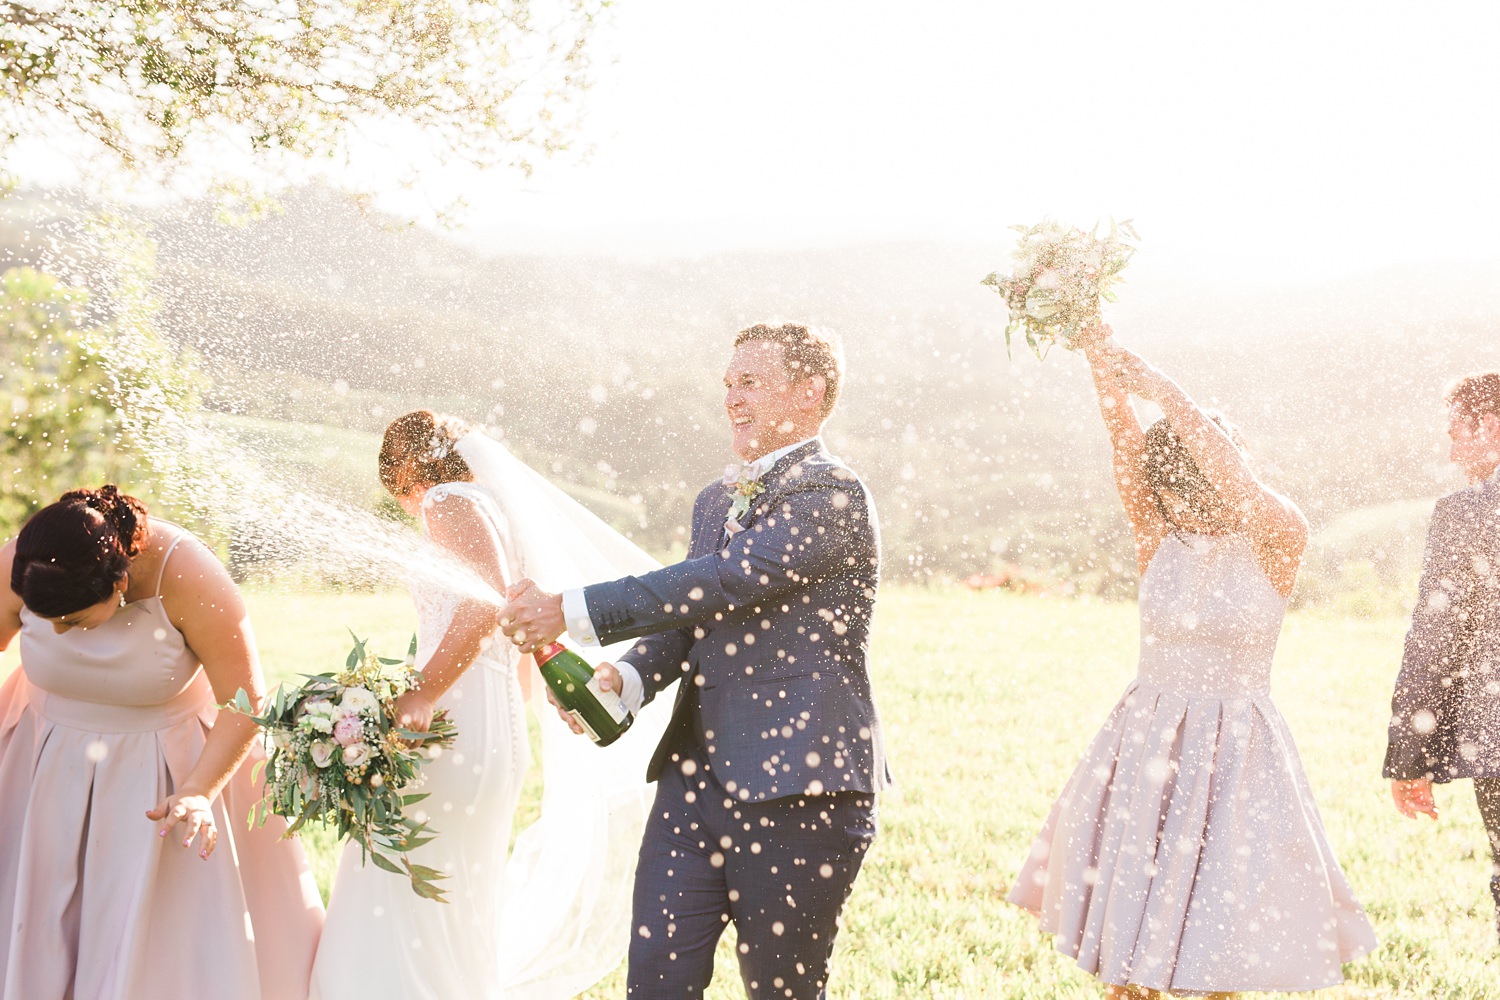 The old dairy maleny wedding by mario colli photography